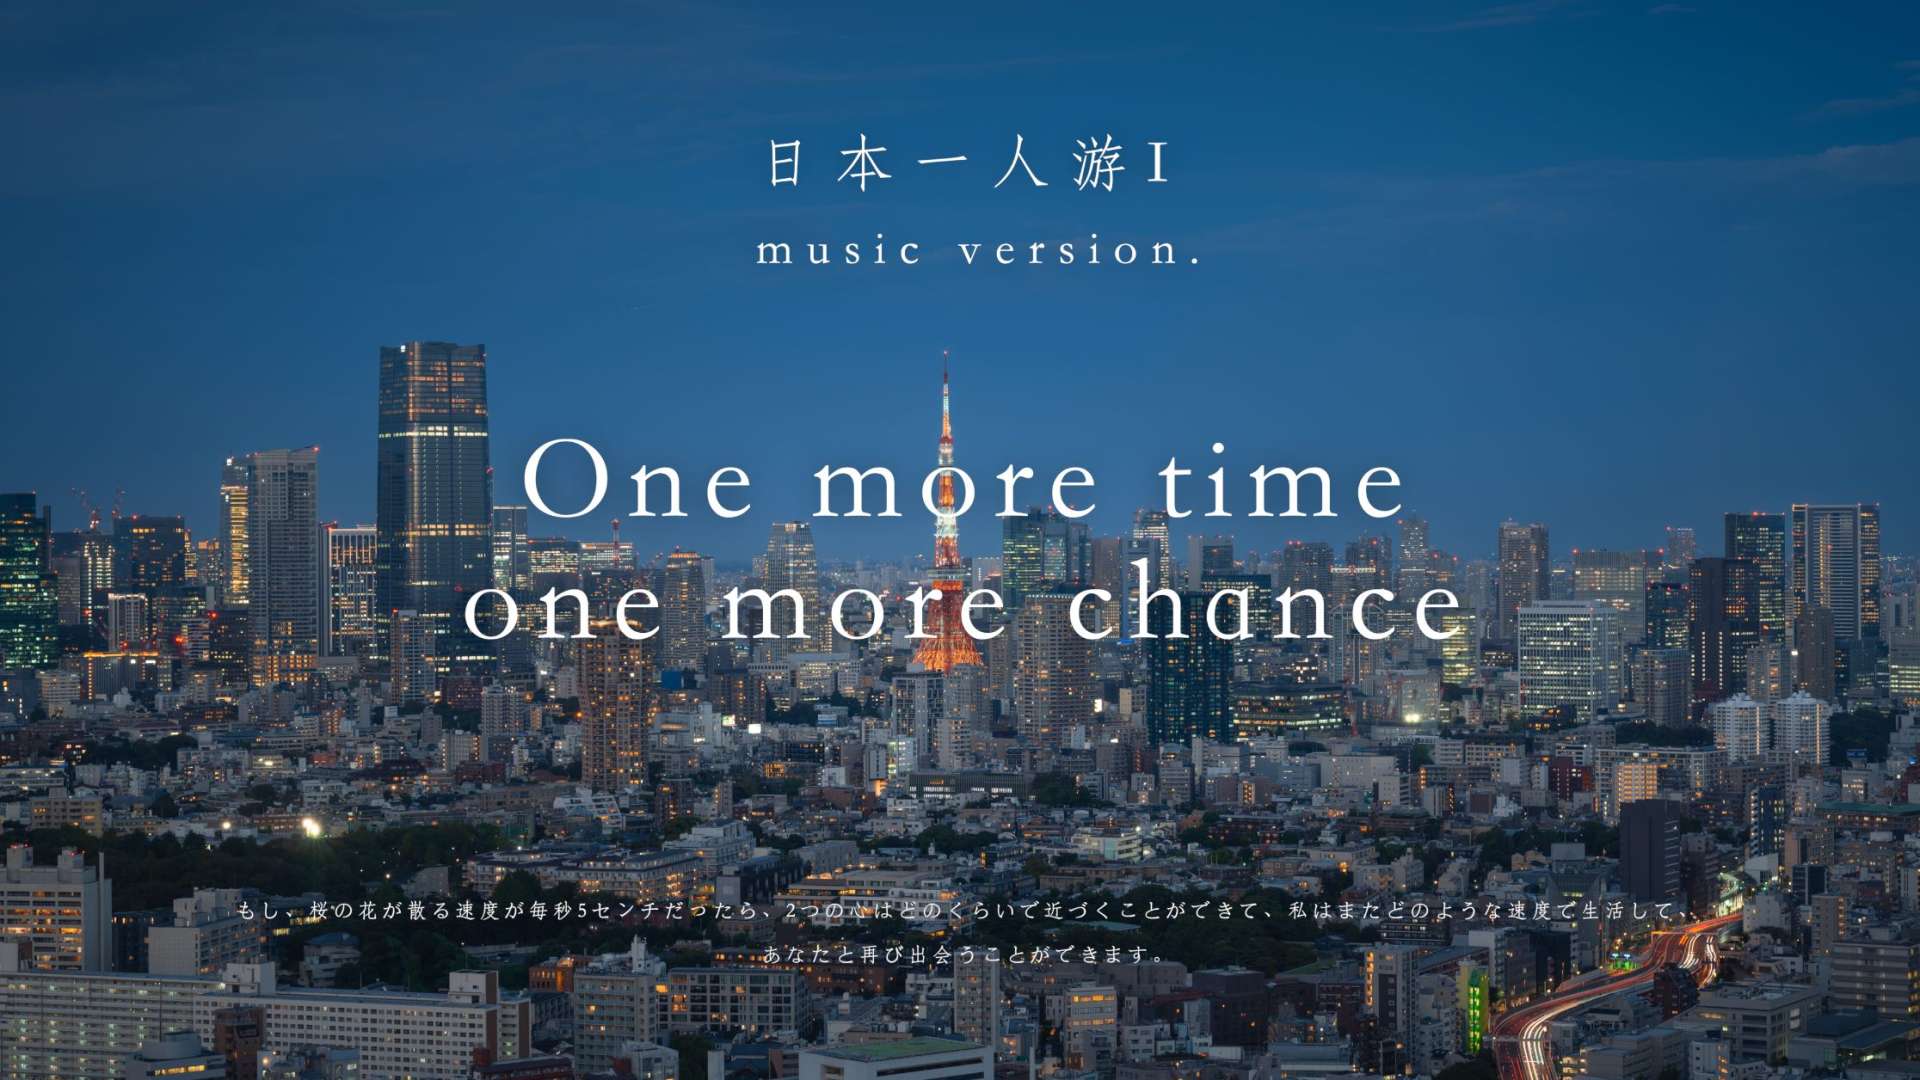 【4K】日本一人行《One more time，one more chance》